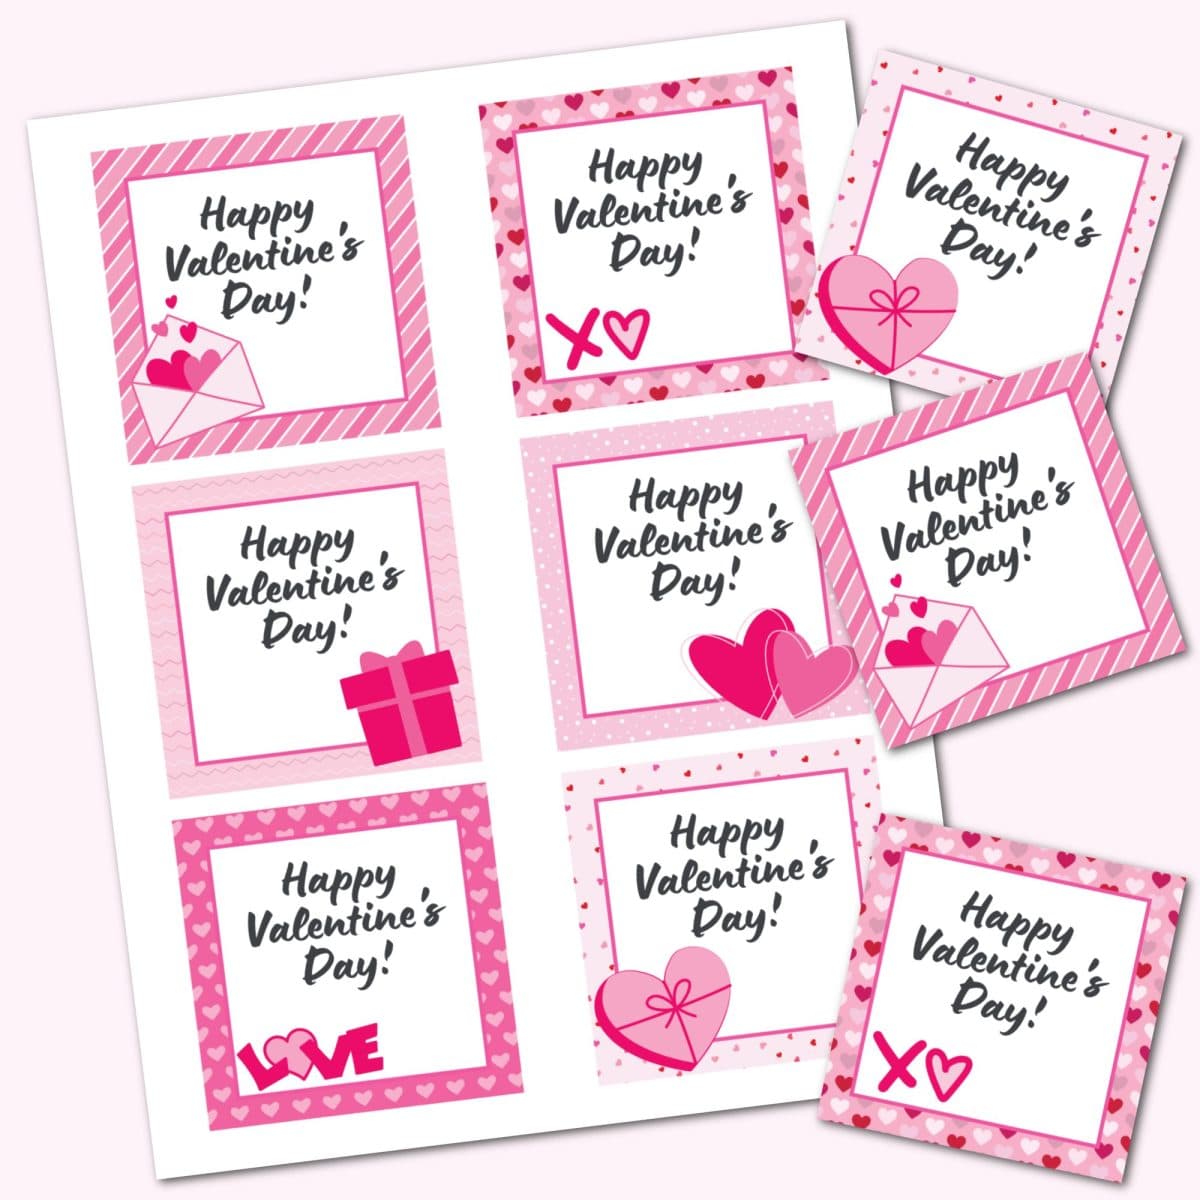 Editable Valentine's Day Gift Tags - Free Download